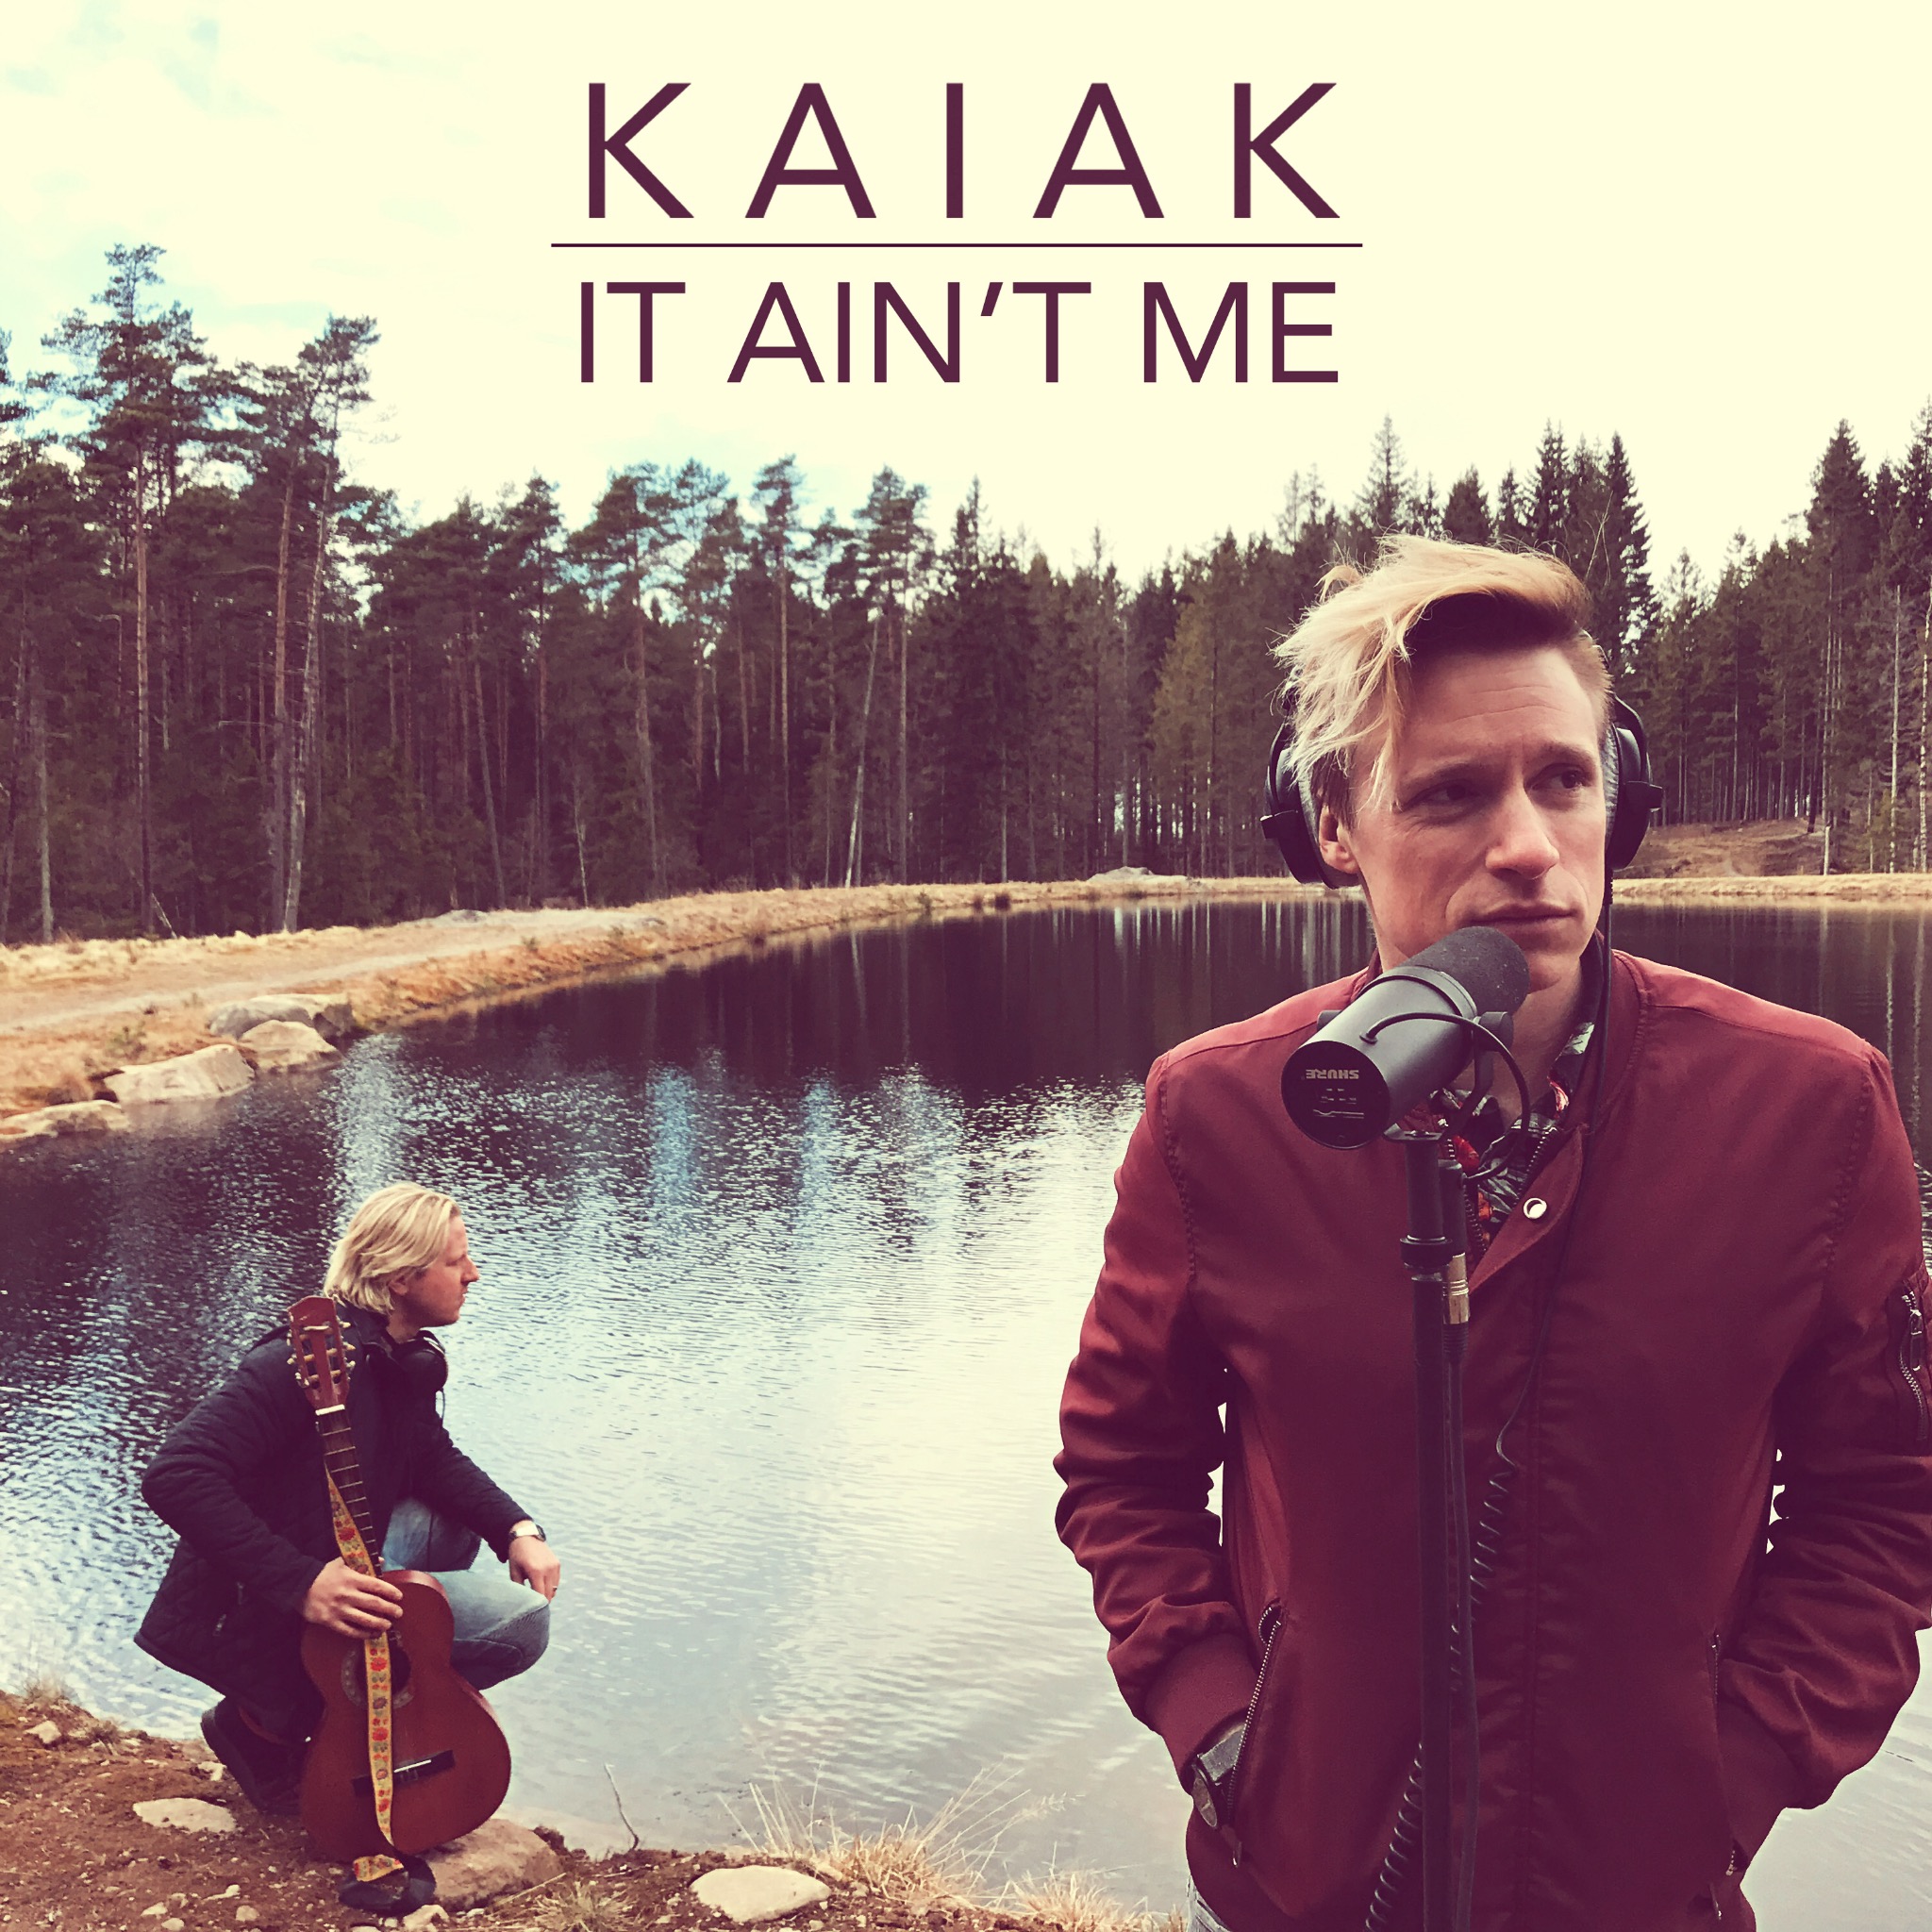 It Ain't Me is a song by the Swedish Duo Kaiak, who release fresh music from the Swedish countryside every Friday. Hear new music first on Fromgirltogirl.com. 